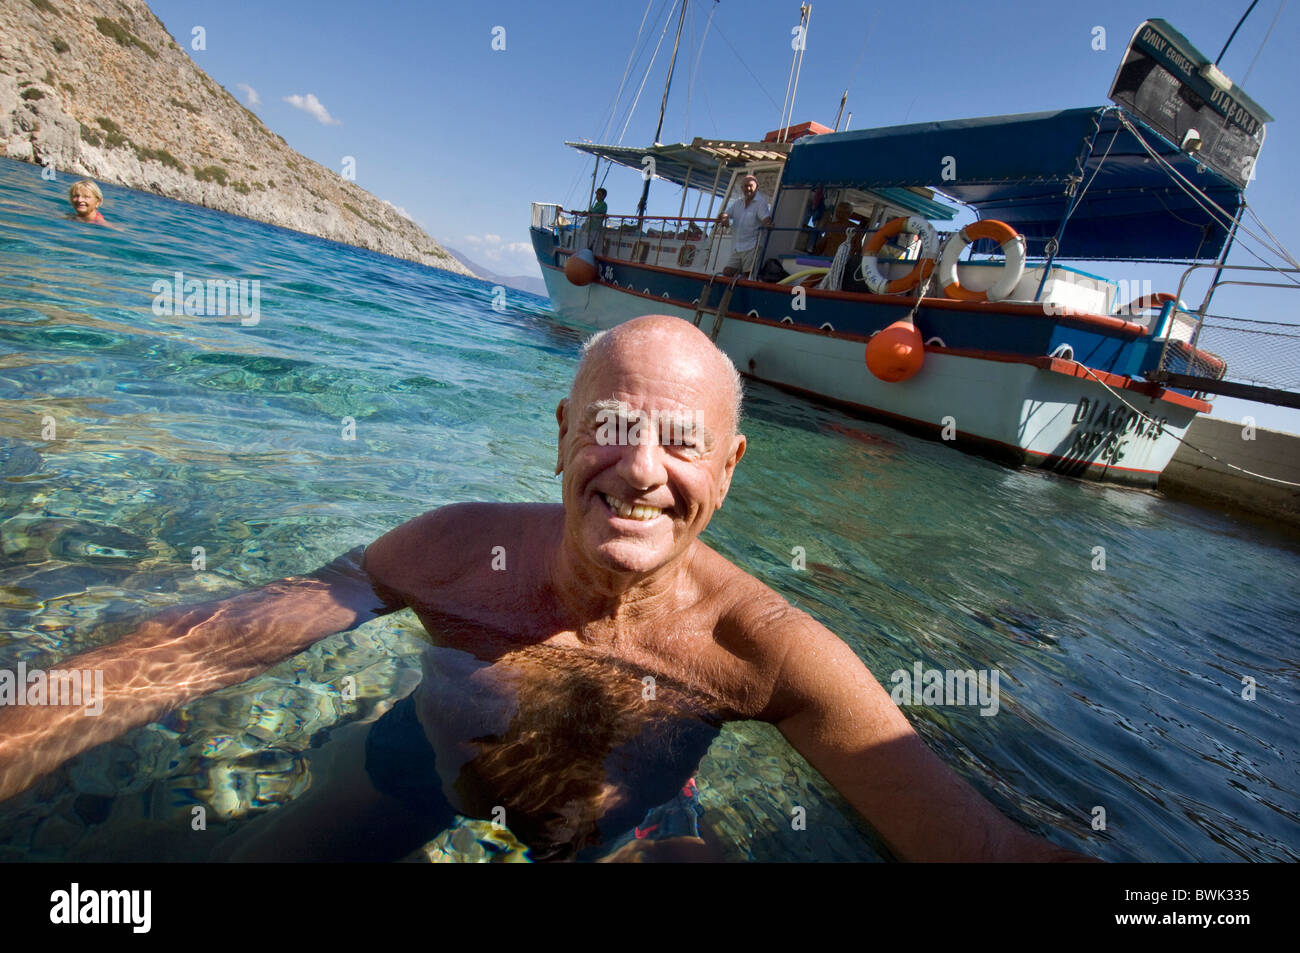 Fit, healthy, tanned older man smiling at camera as he swims in the sea off the Greek Island of Symi Stock Photo